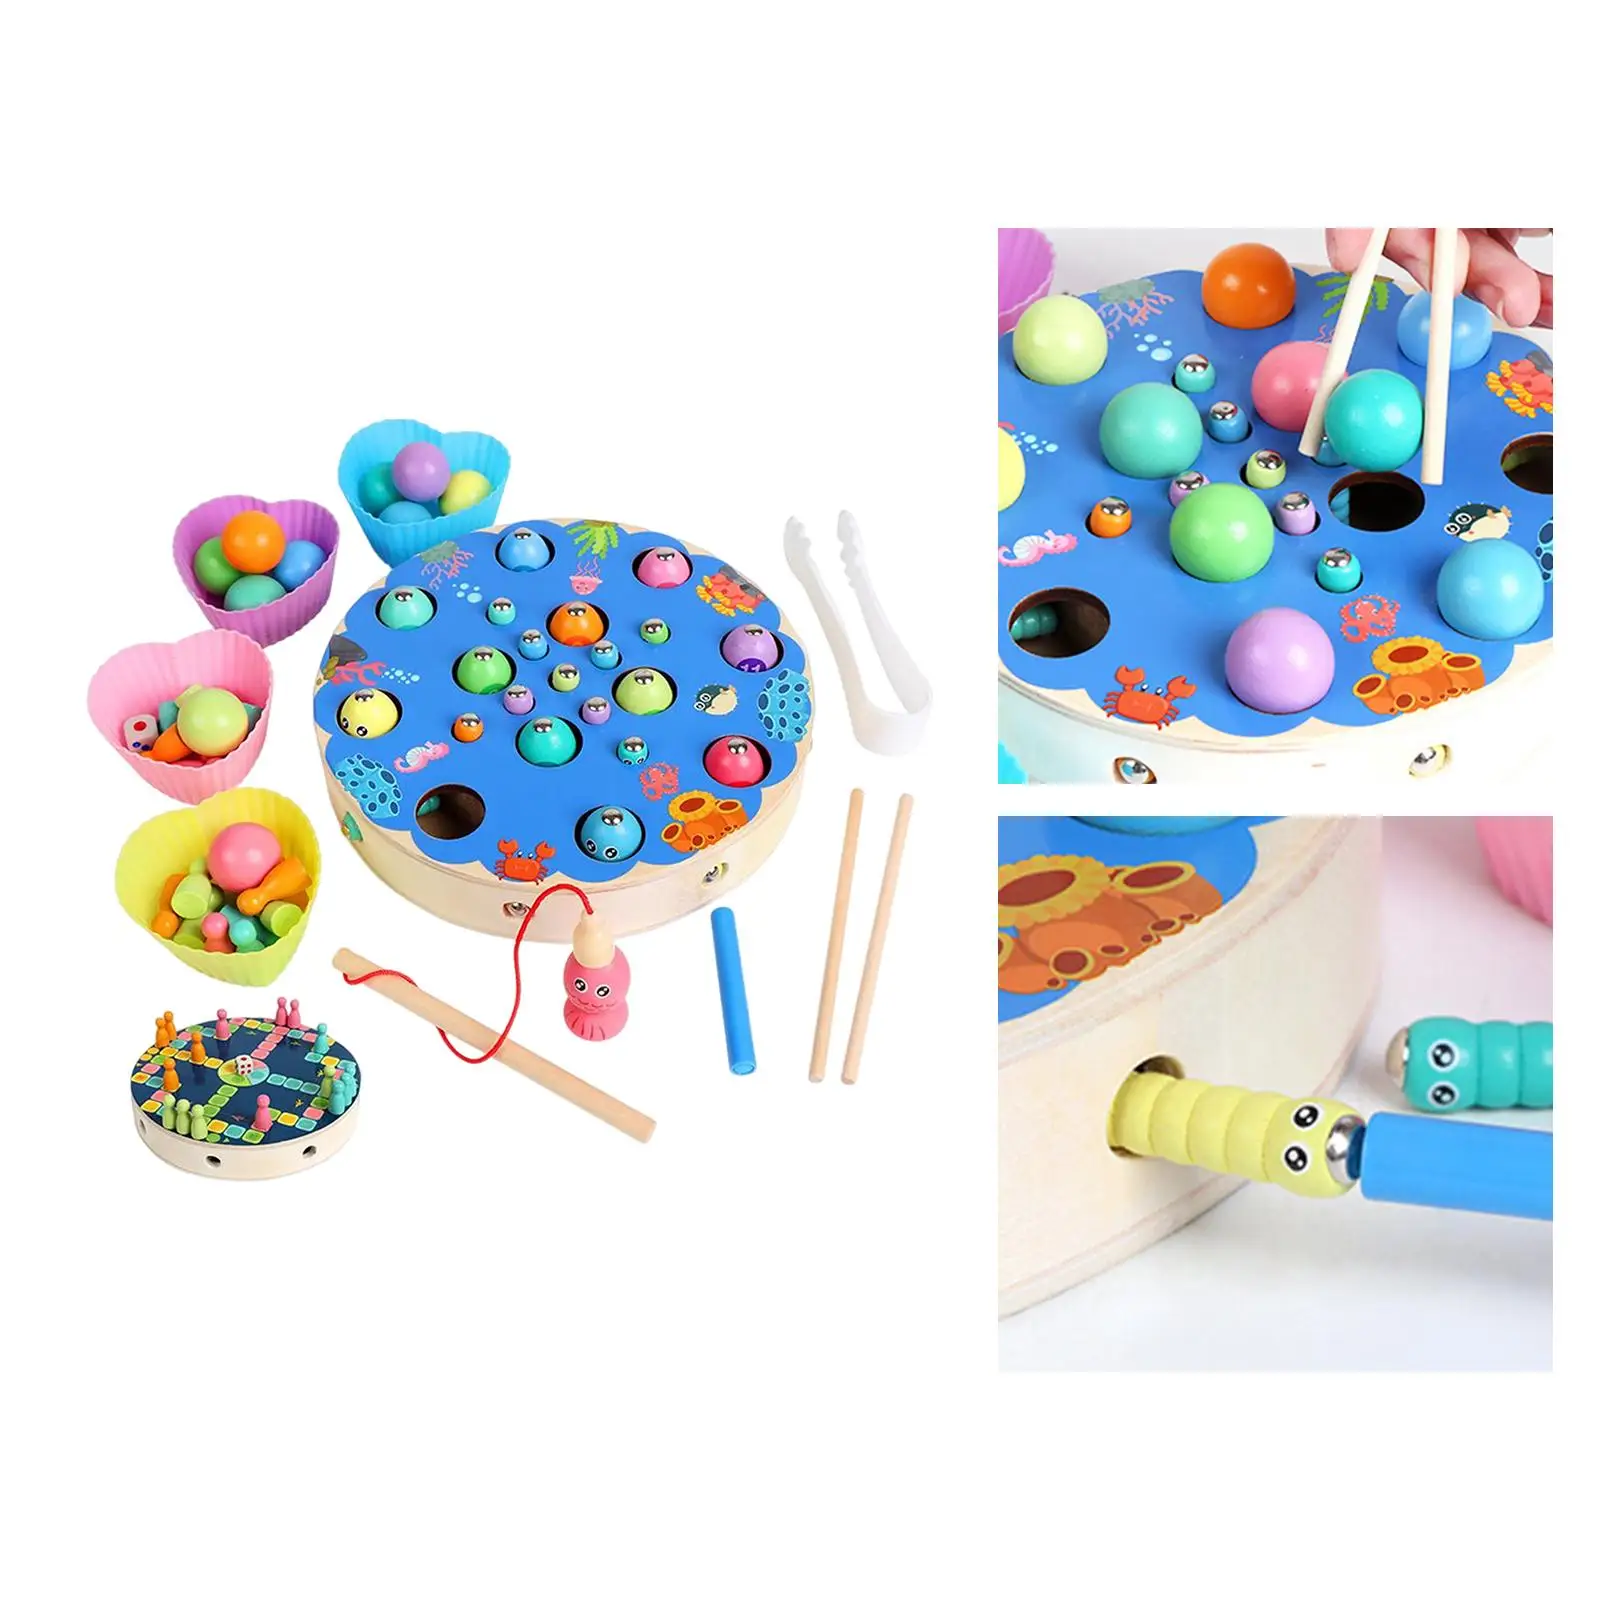 Multicolor Montessori Toys Clamp Color Recognition Chopsticks Educational Wooden Fishing Game for Game Indoor Activity Outdoor